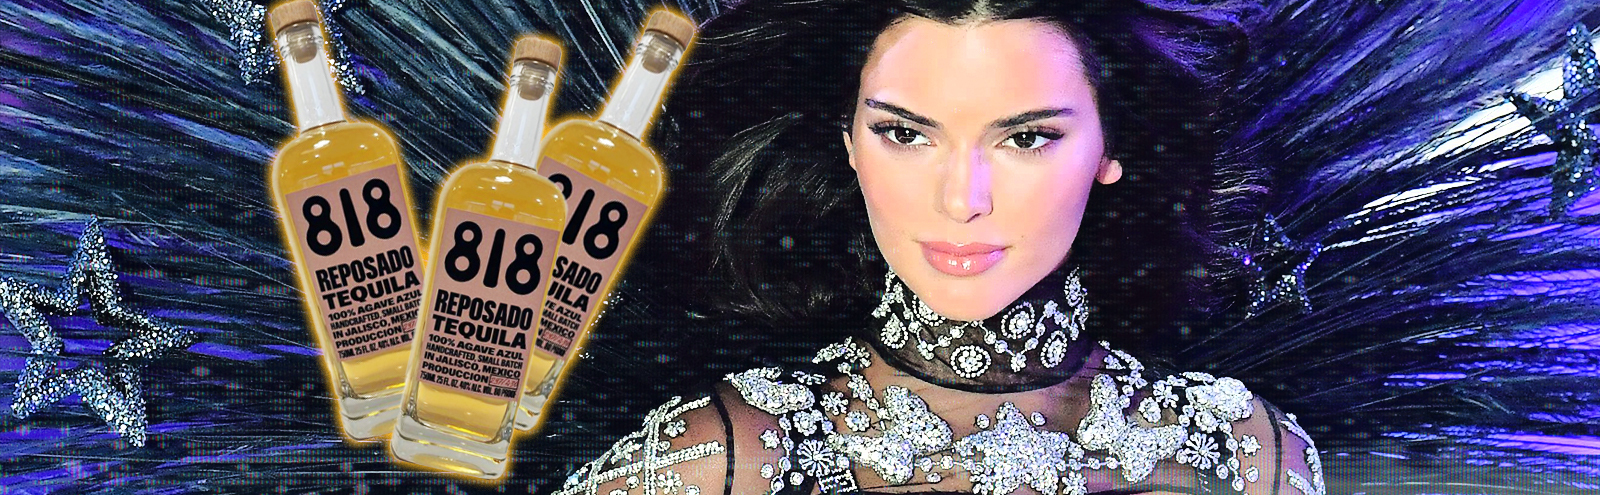 818 Luggage Tag Kendall Jenner with 818 Tequila Luggage Tag